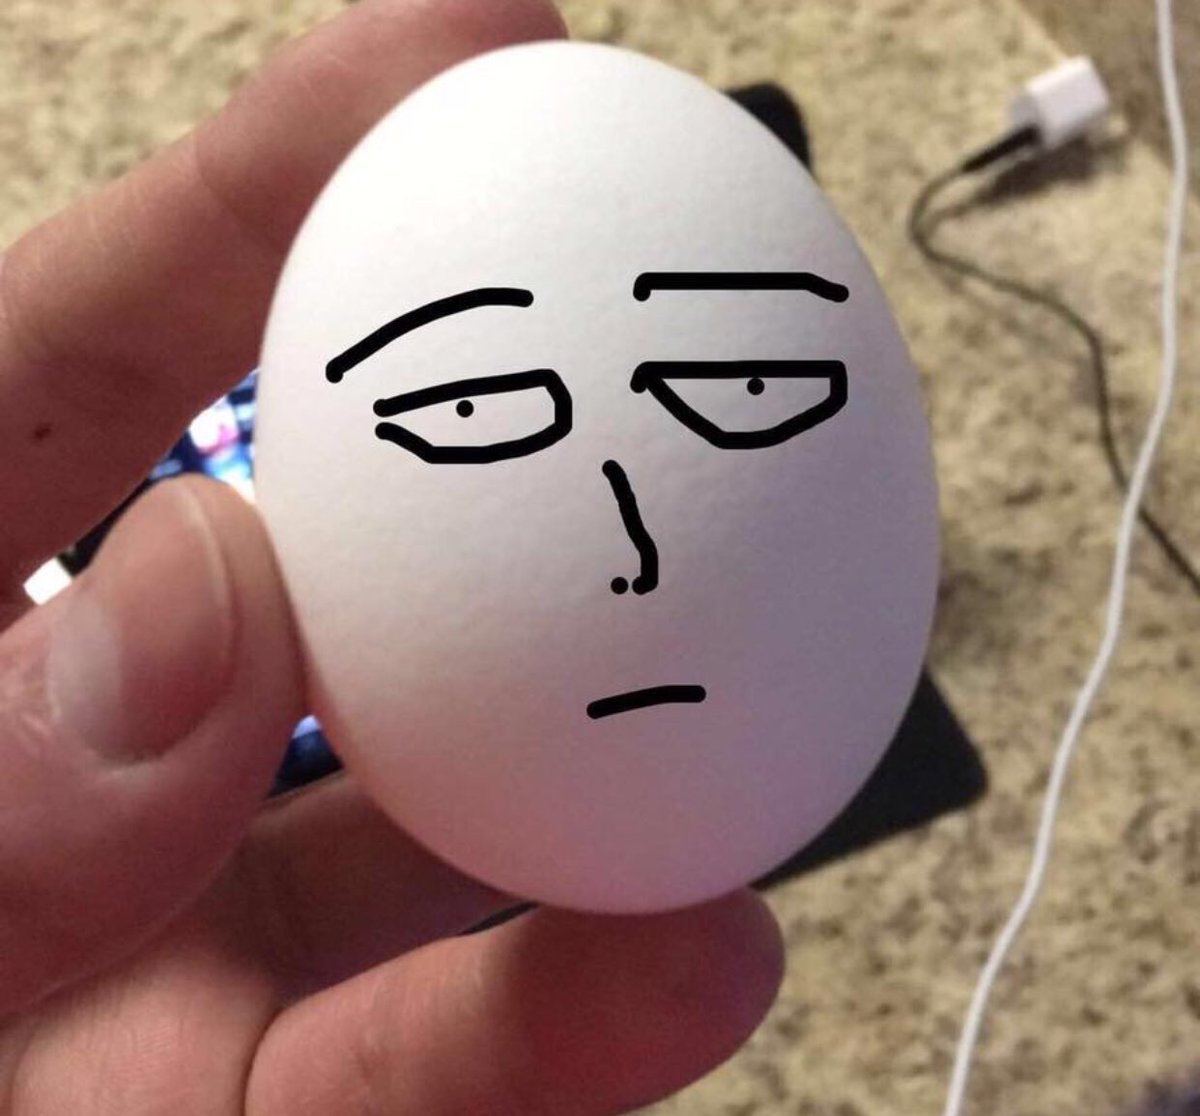 My breakfast this morning creeped me out 

#OnePunchMan
#EggsForBreakfast